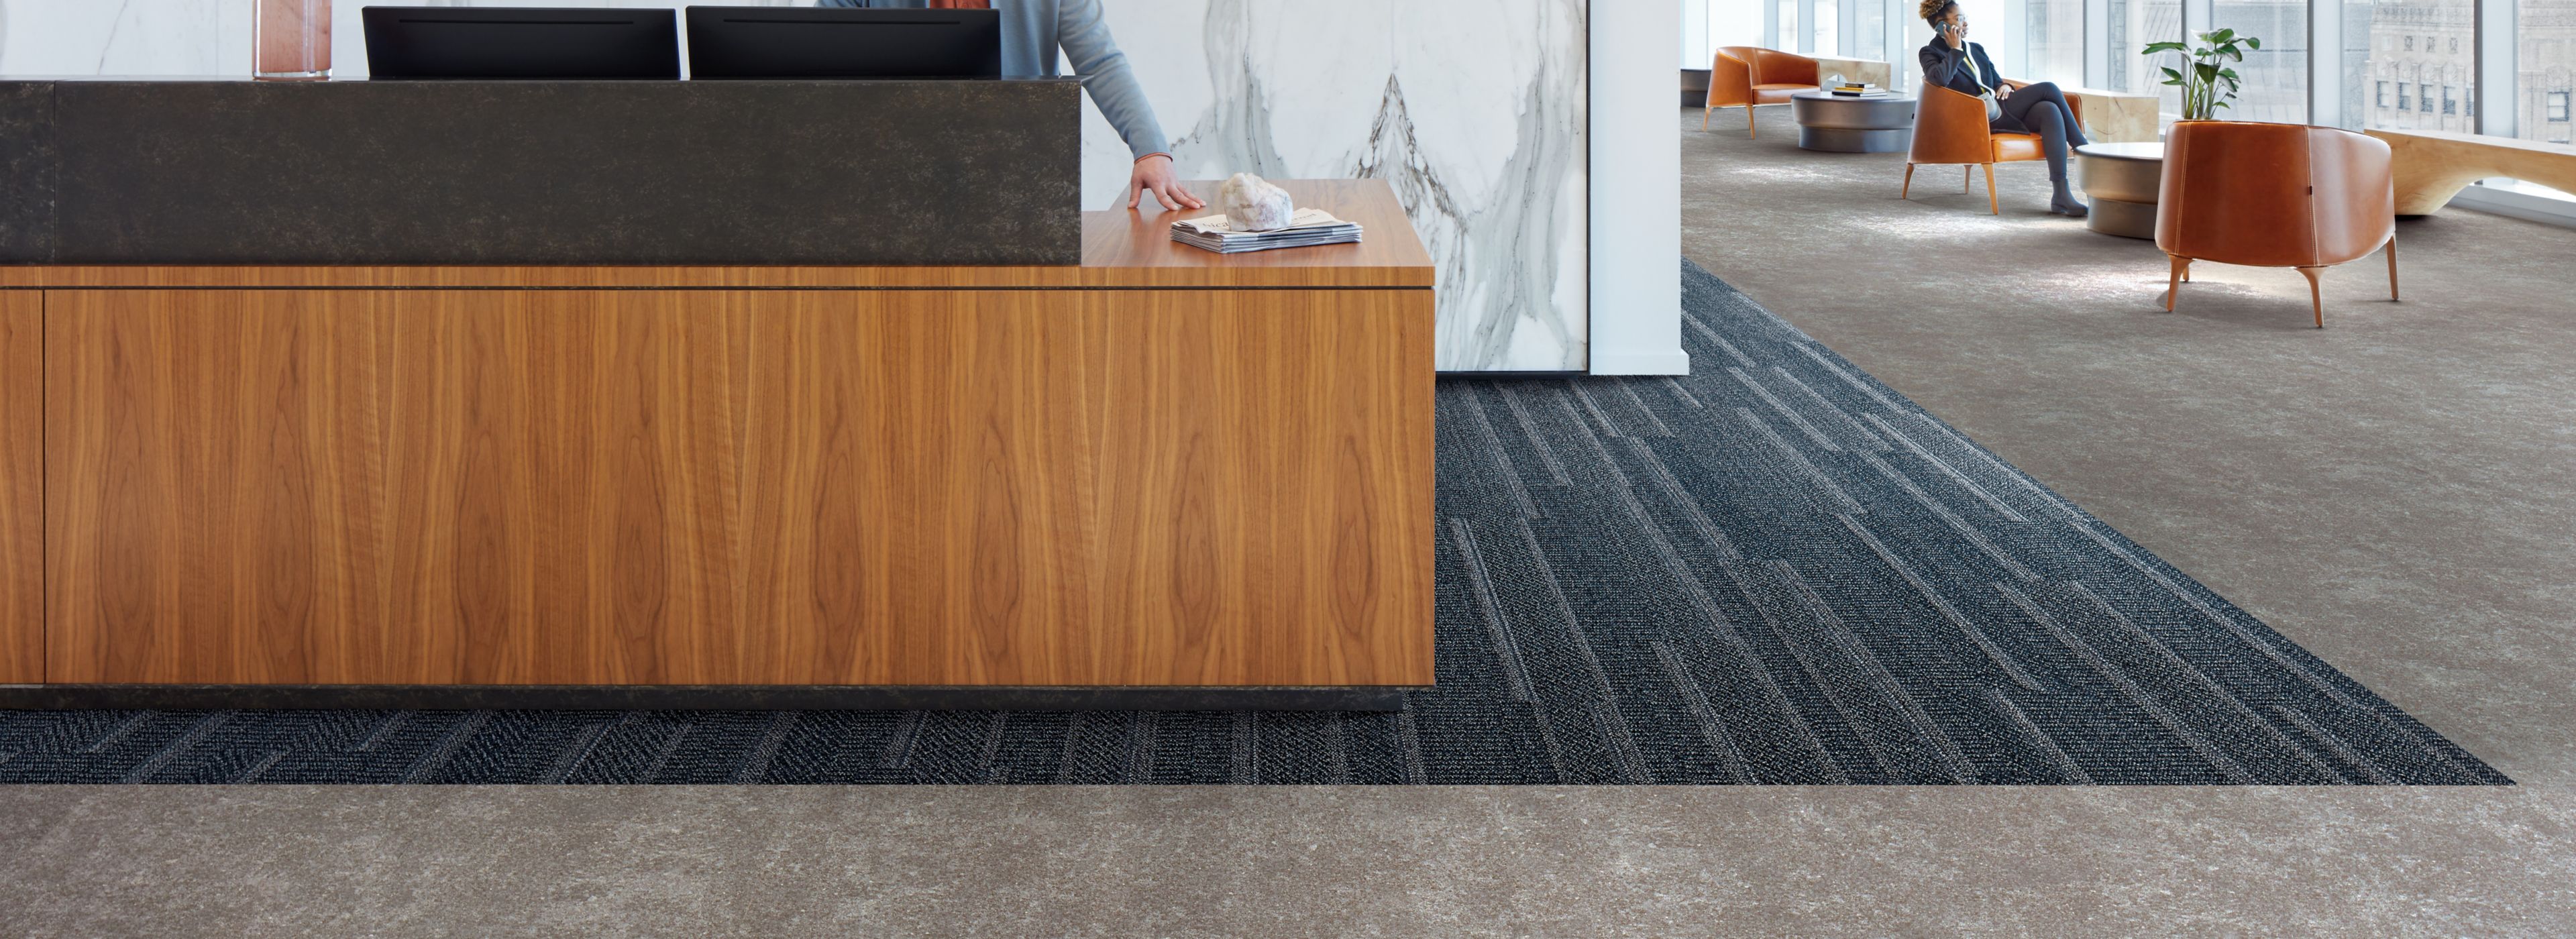 Interface Simple Sash plank carpet tile and Walk of Life LVT in a corporate lobby area with front desk  image number 1